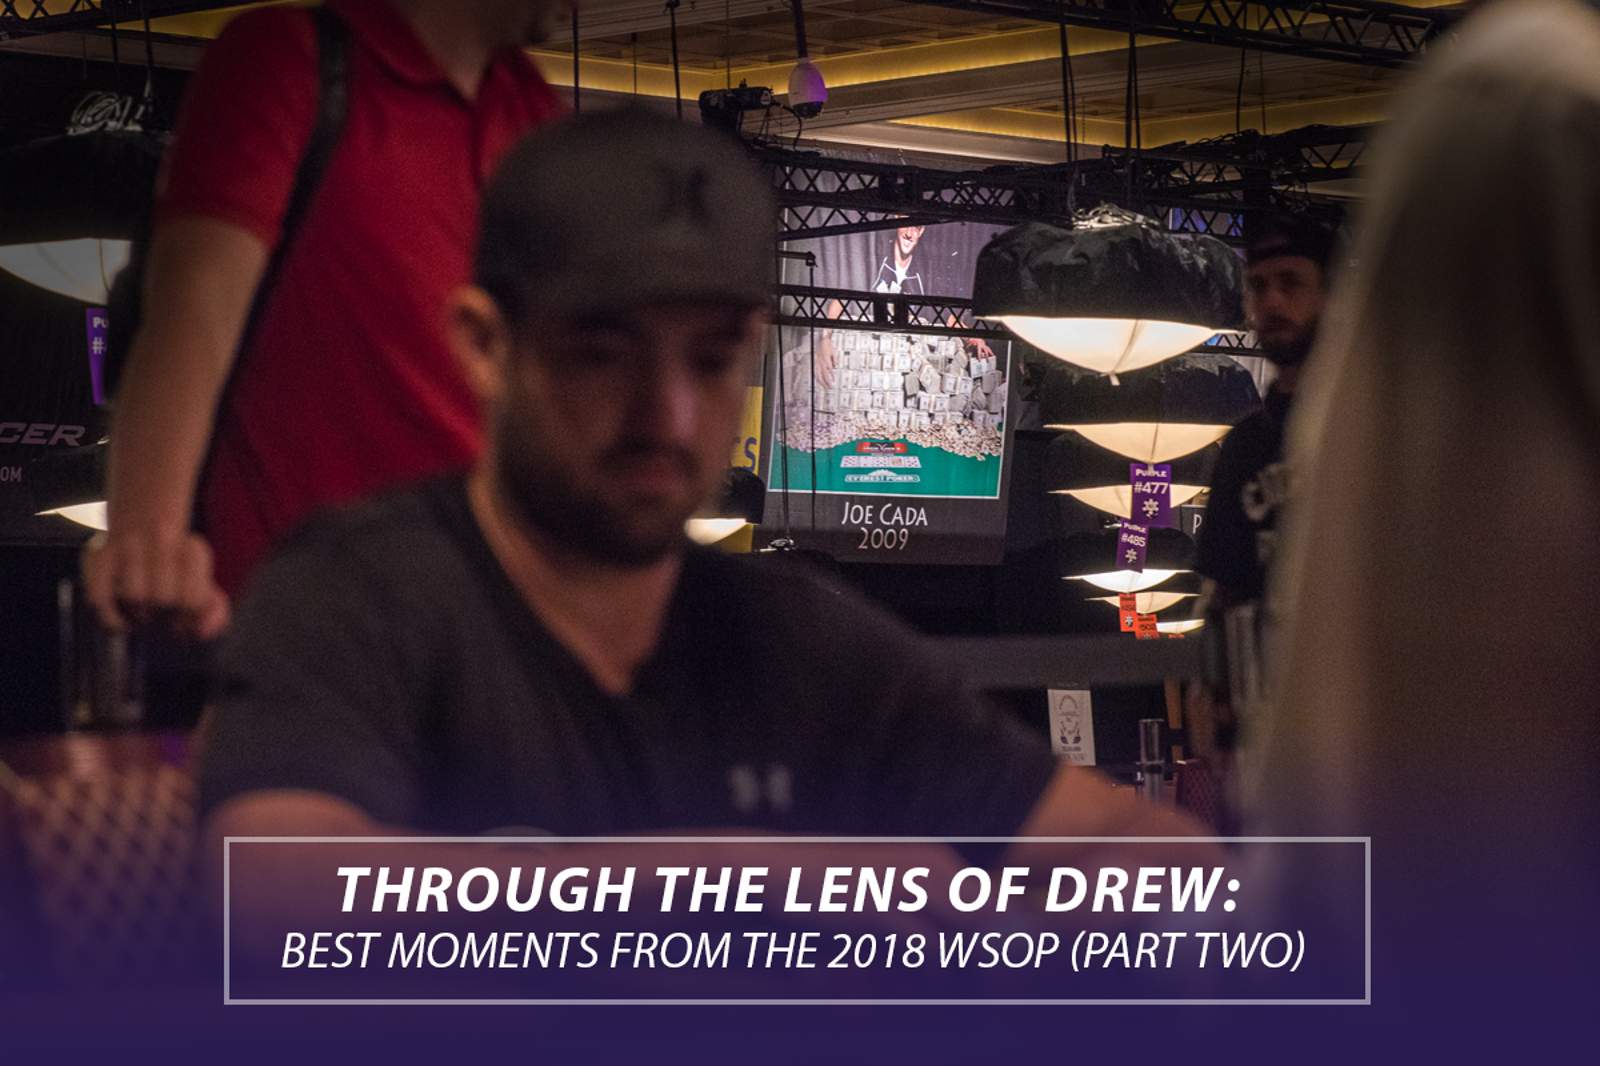 Through the Lens: Best Moments From the 2018 WSOP (Part Two)